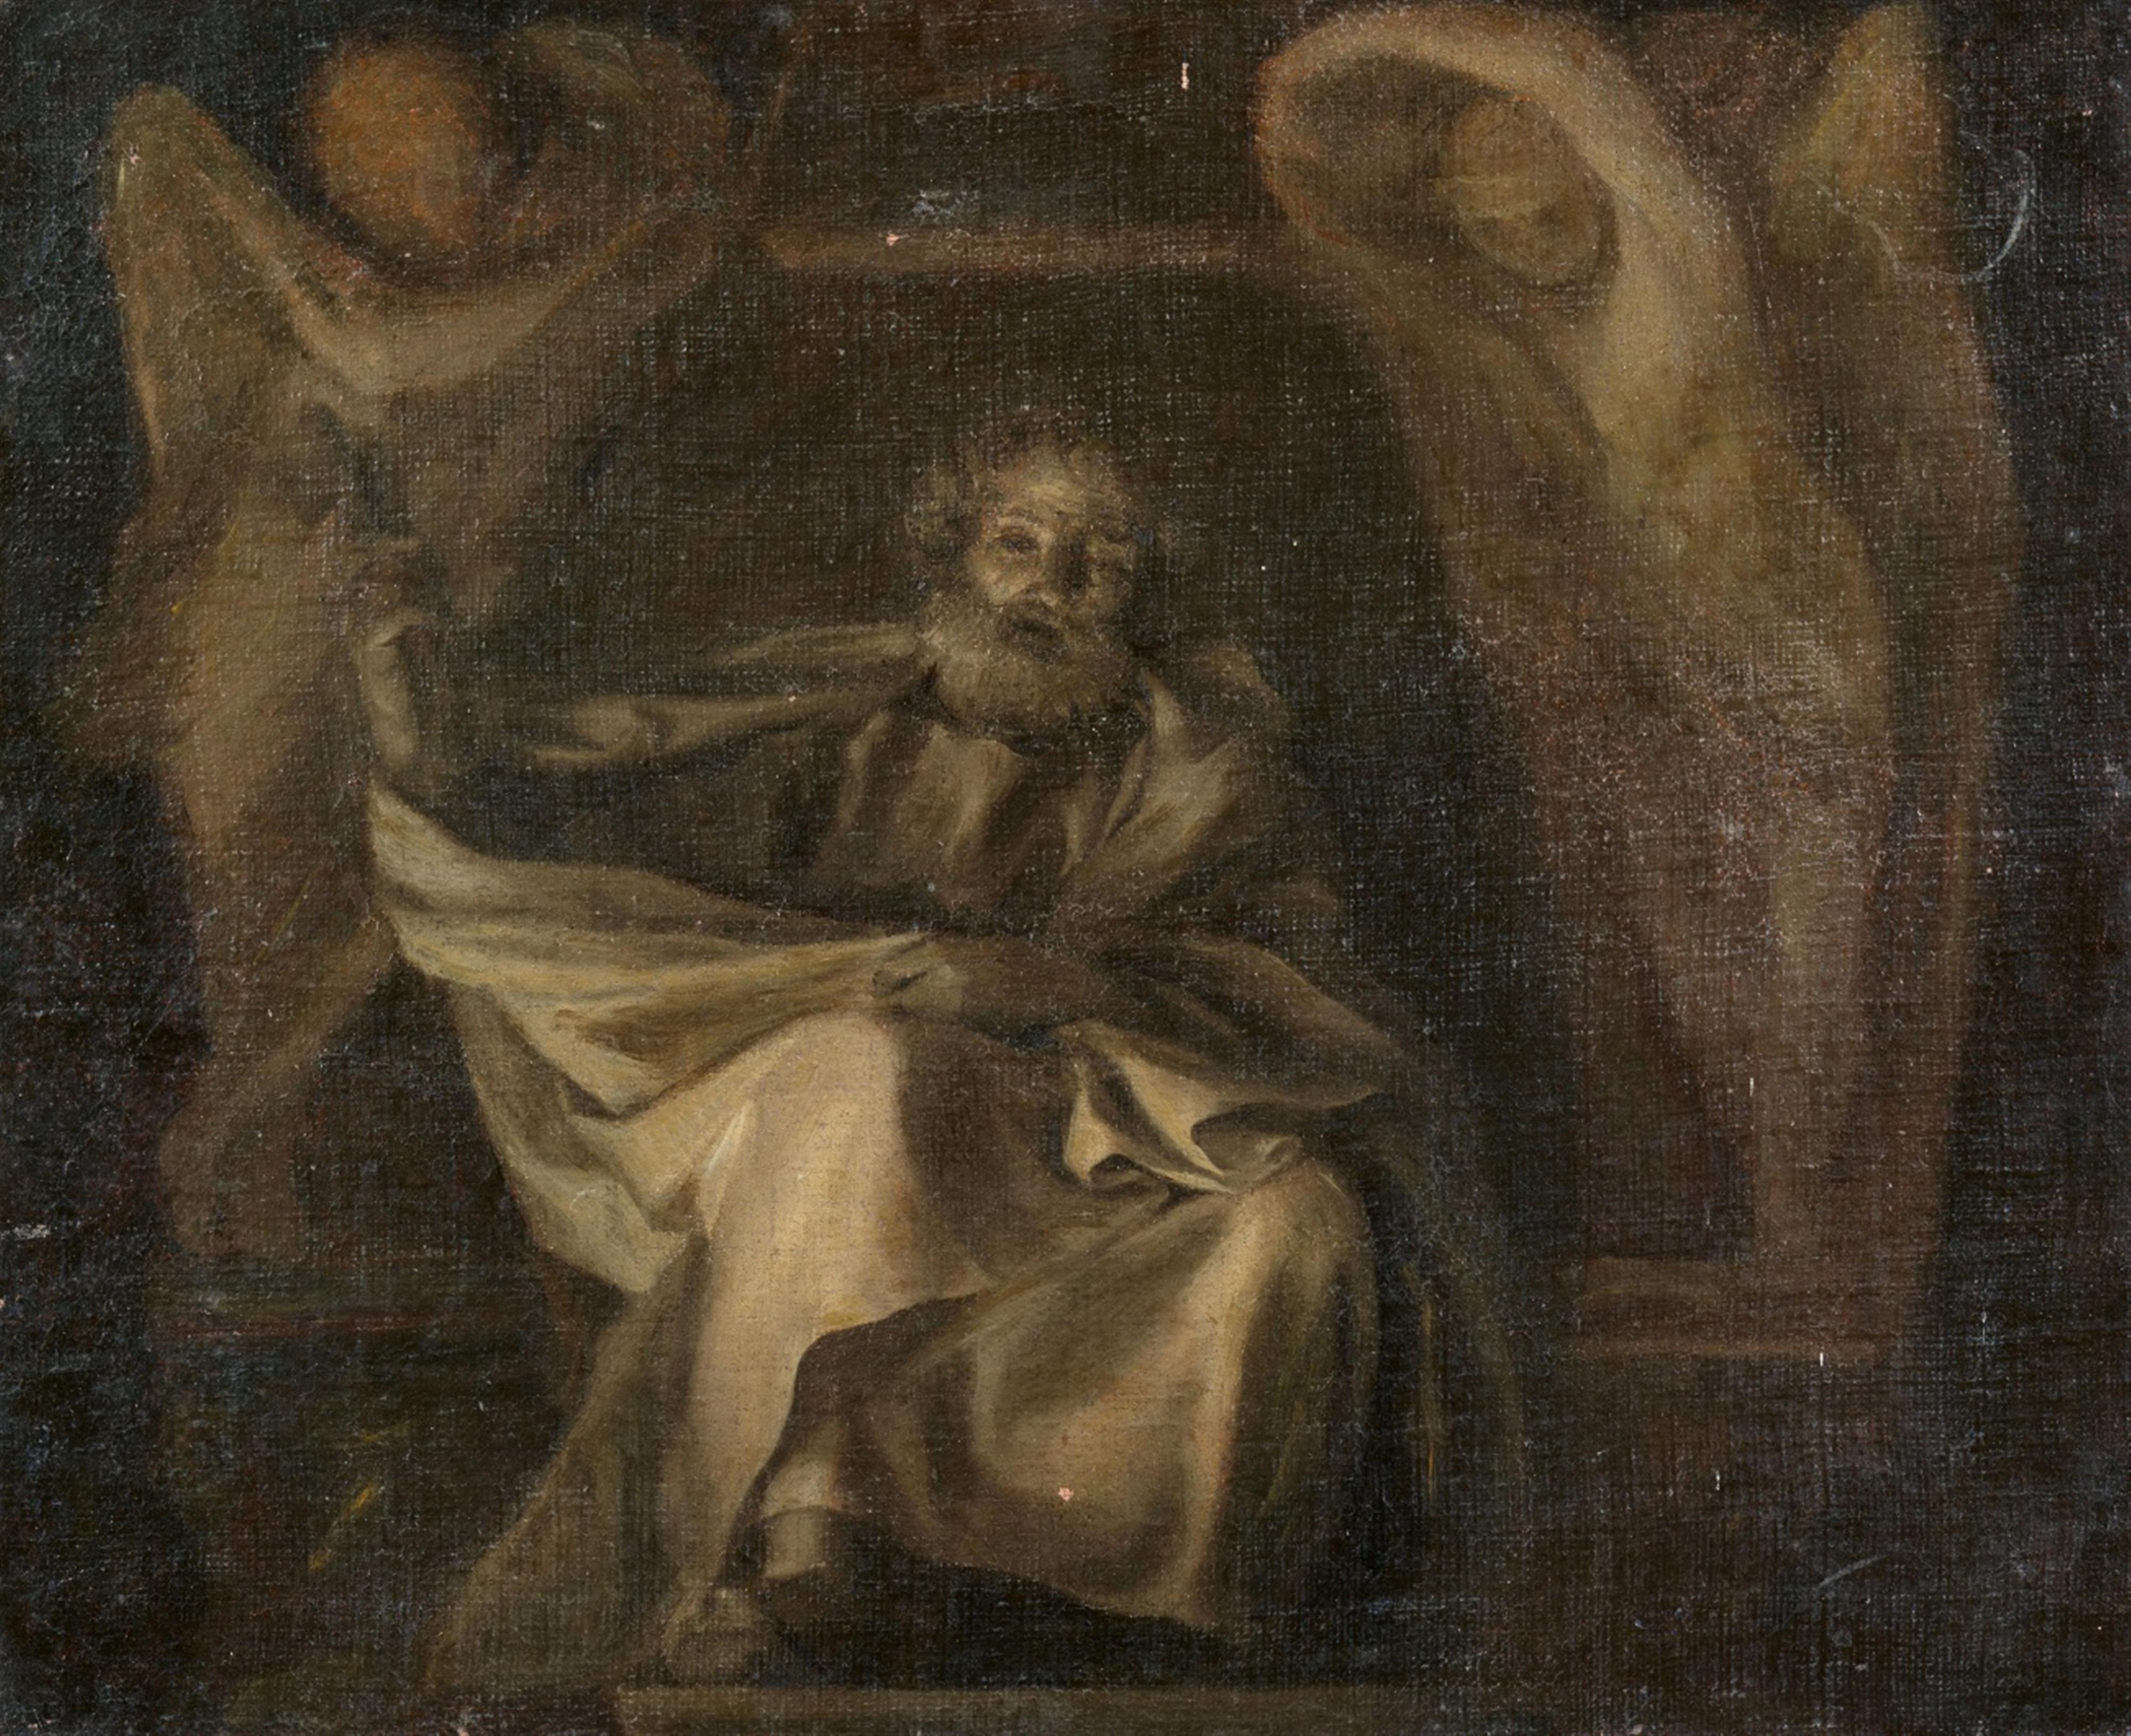 Anton Raphael Mengs - Saint Peter Holding The Keys, Framed by Two angels. Grisaille Bozzetto for the Fresco in the Sala dei Papiri in the Palazzo Apostolico Vaticano, Rome - image-1